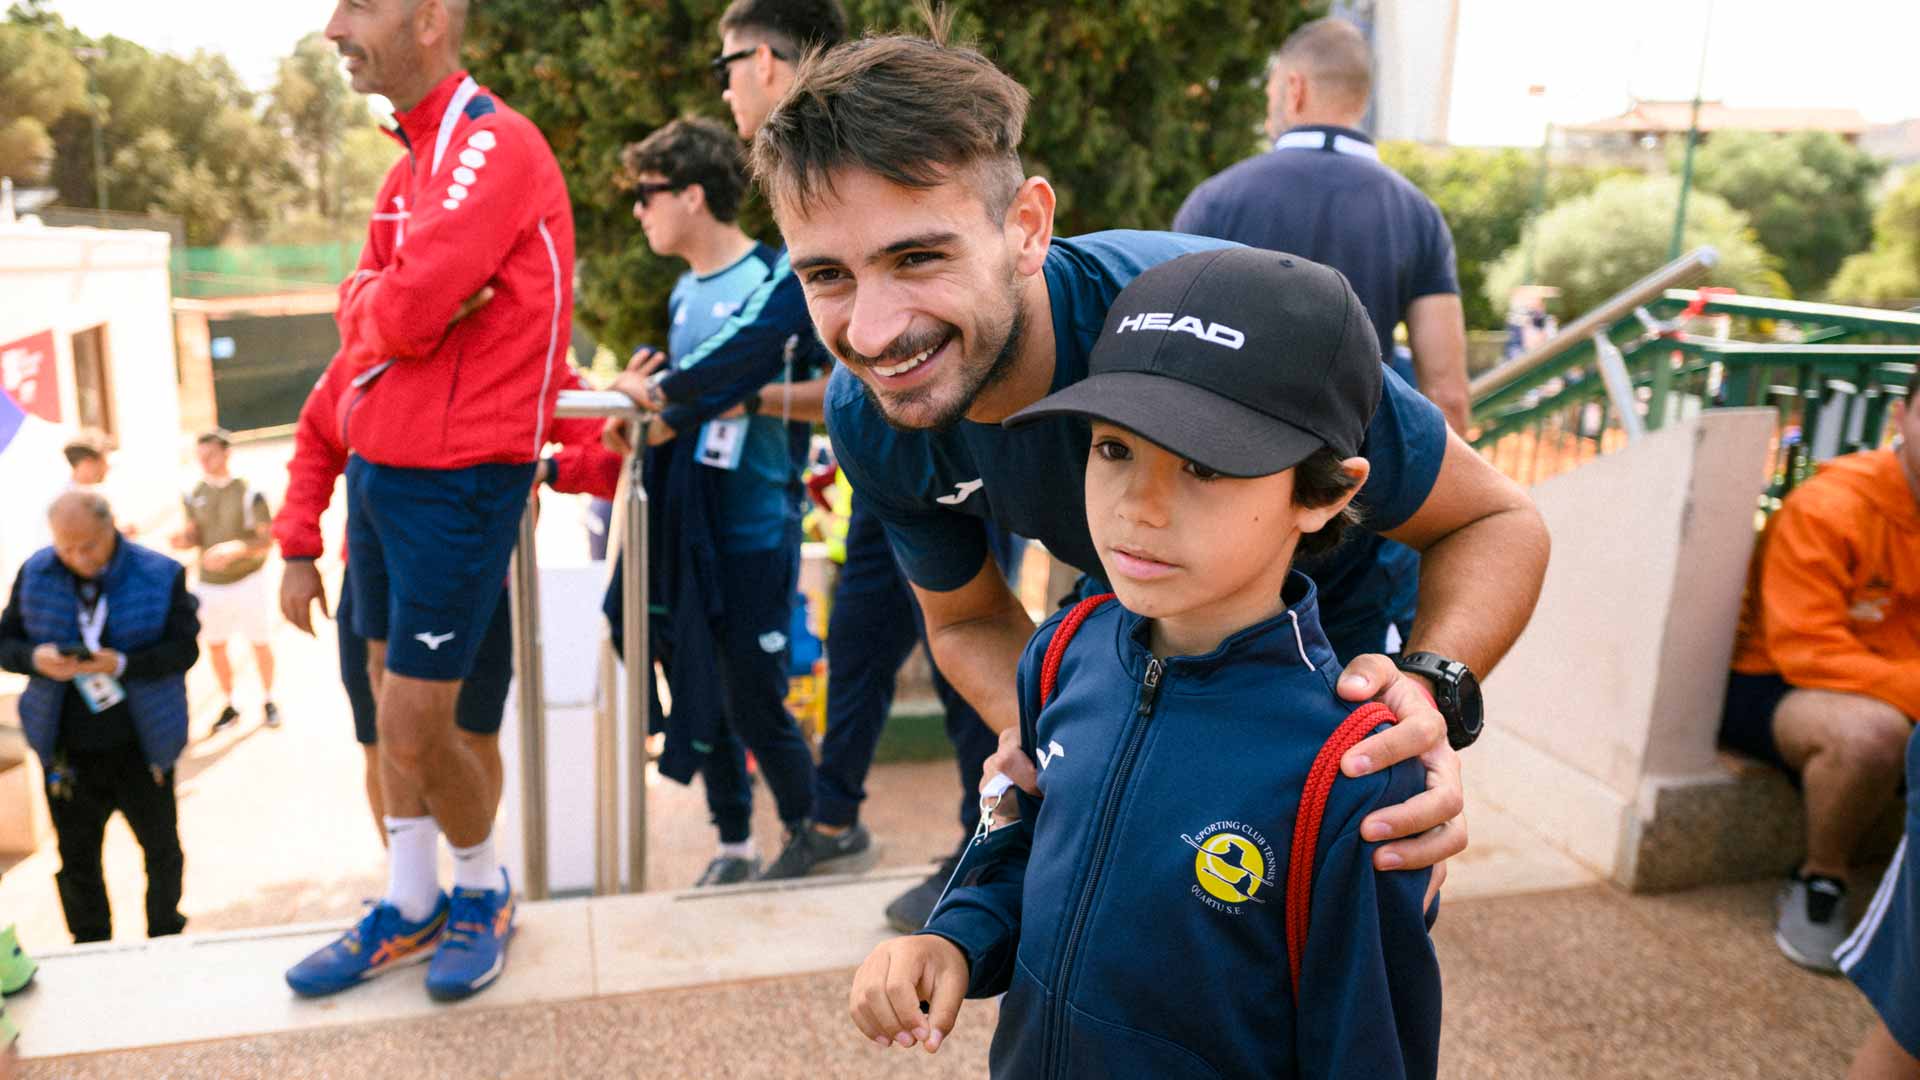 <a href='https://www.atptour.com/en/players/mariano-navone/n0bs/overview'>Mariano Navone</a> greets a fan at the Cagliari Challenger.